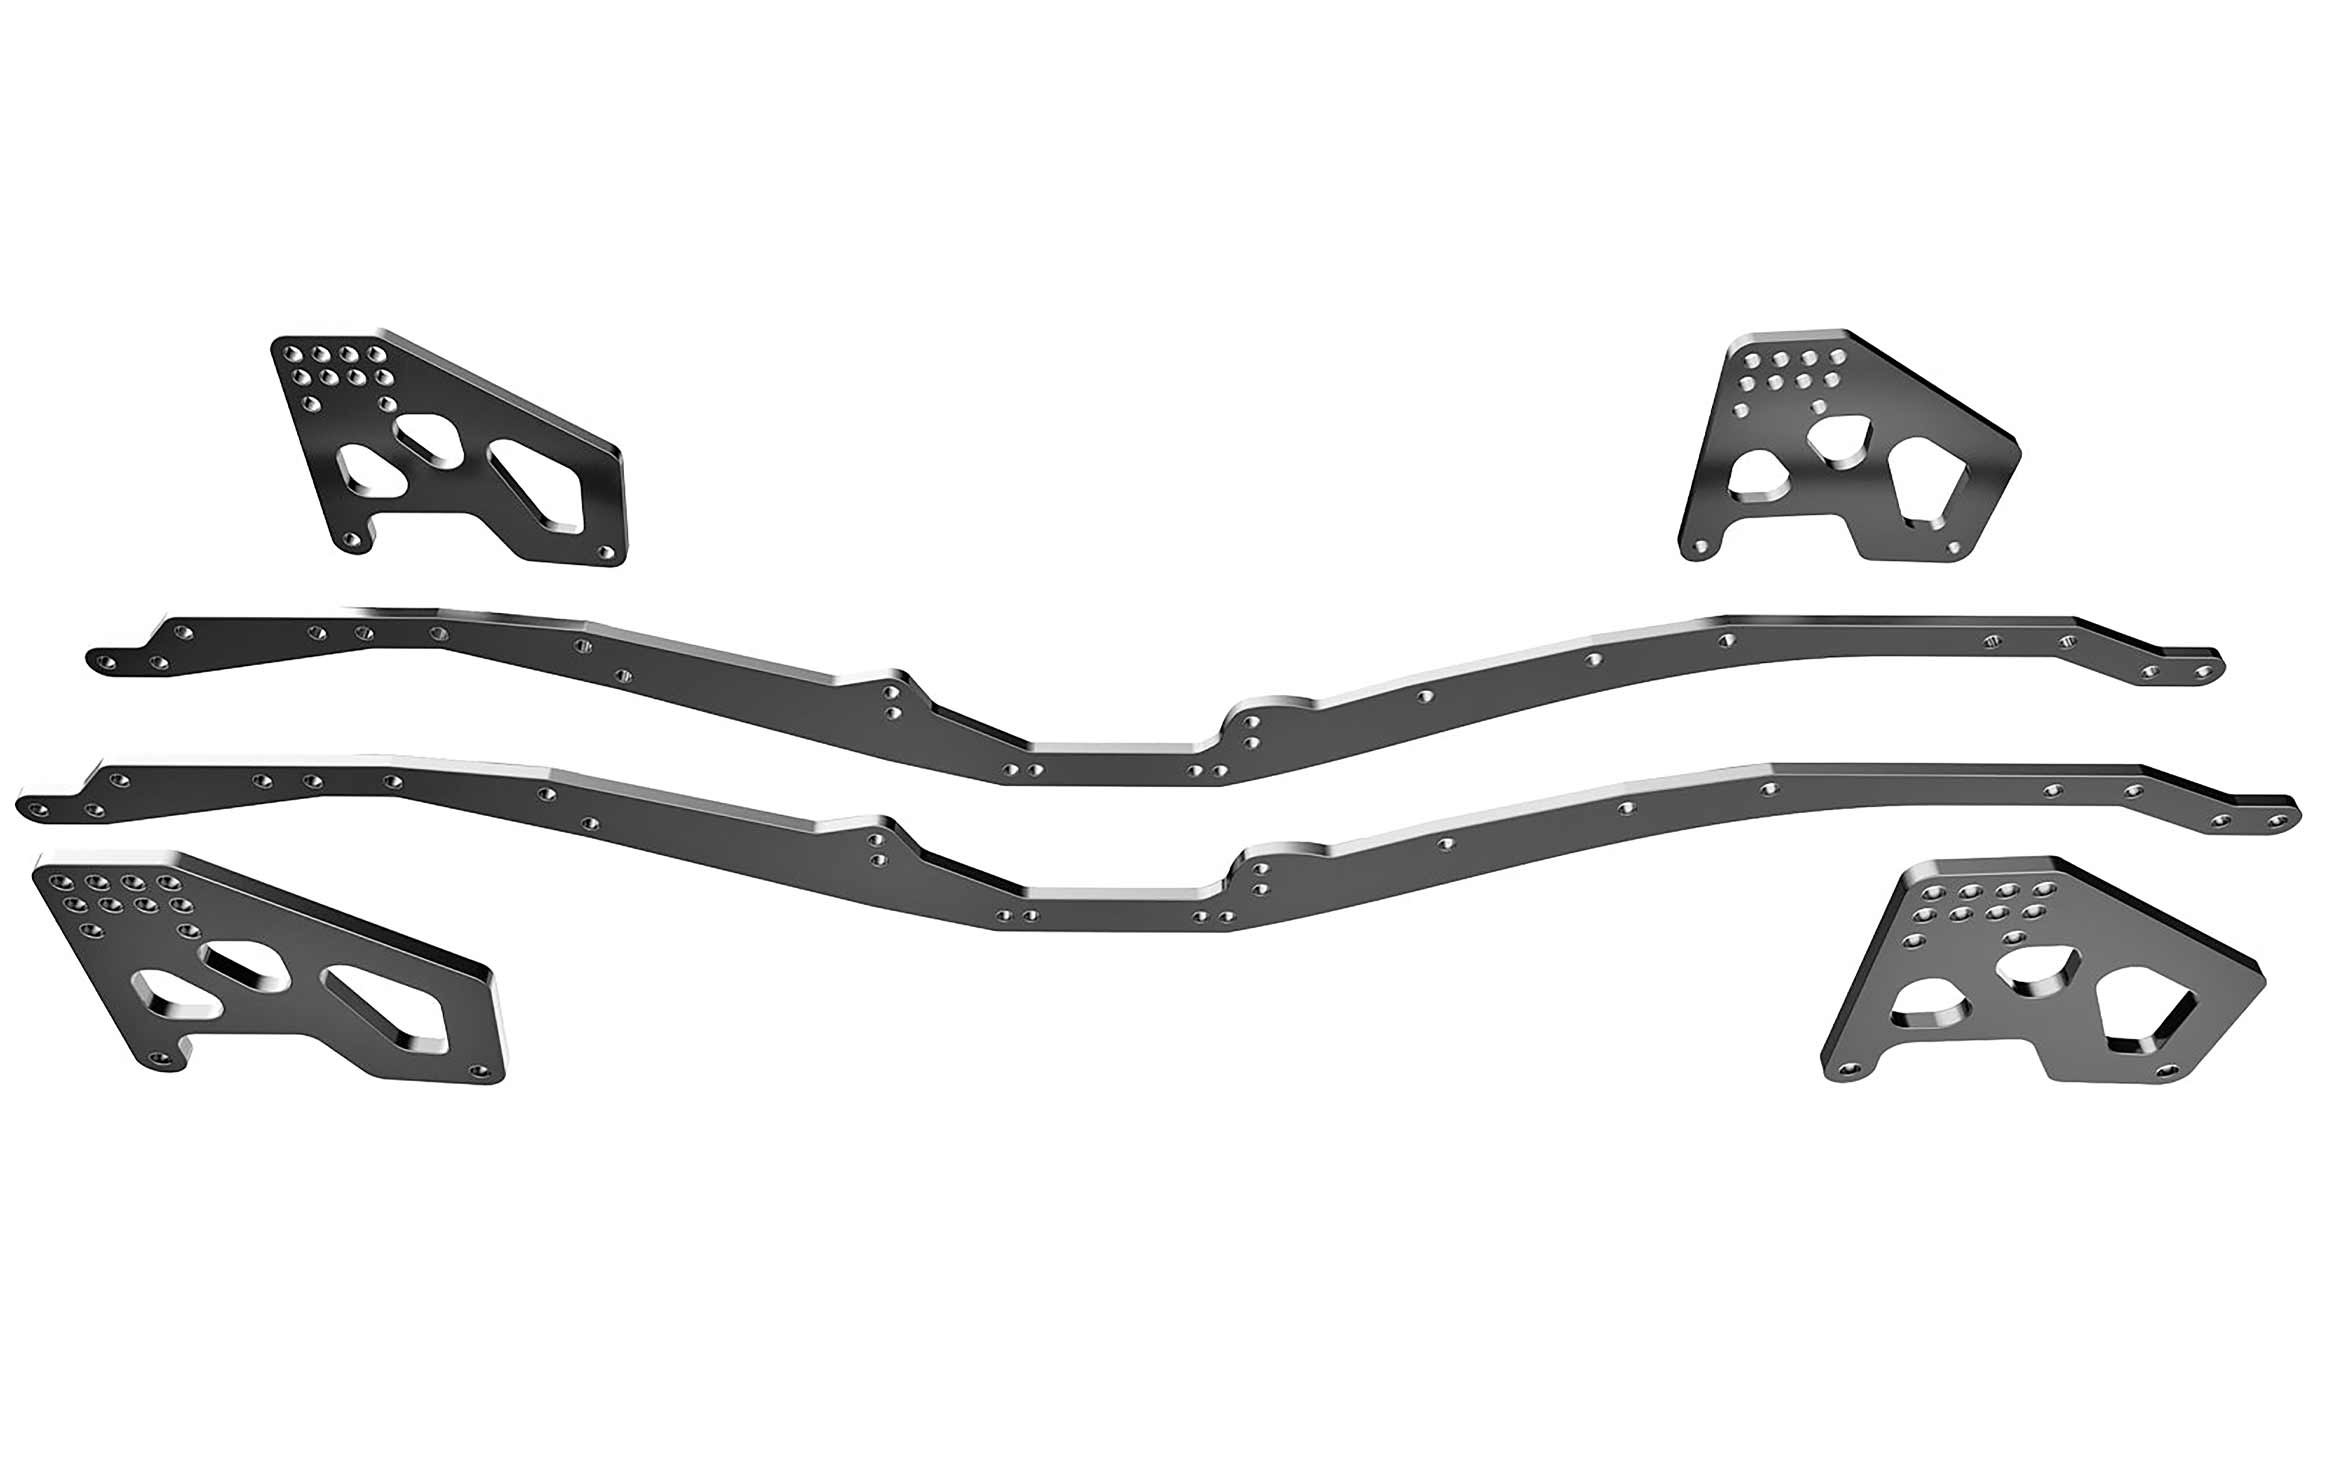 Low Center of Gravity Flat Rail Chassis